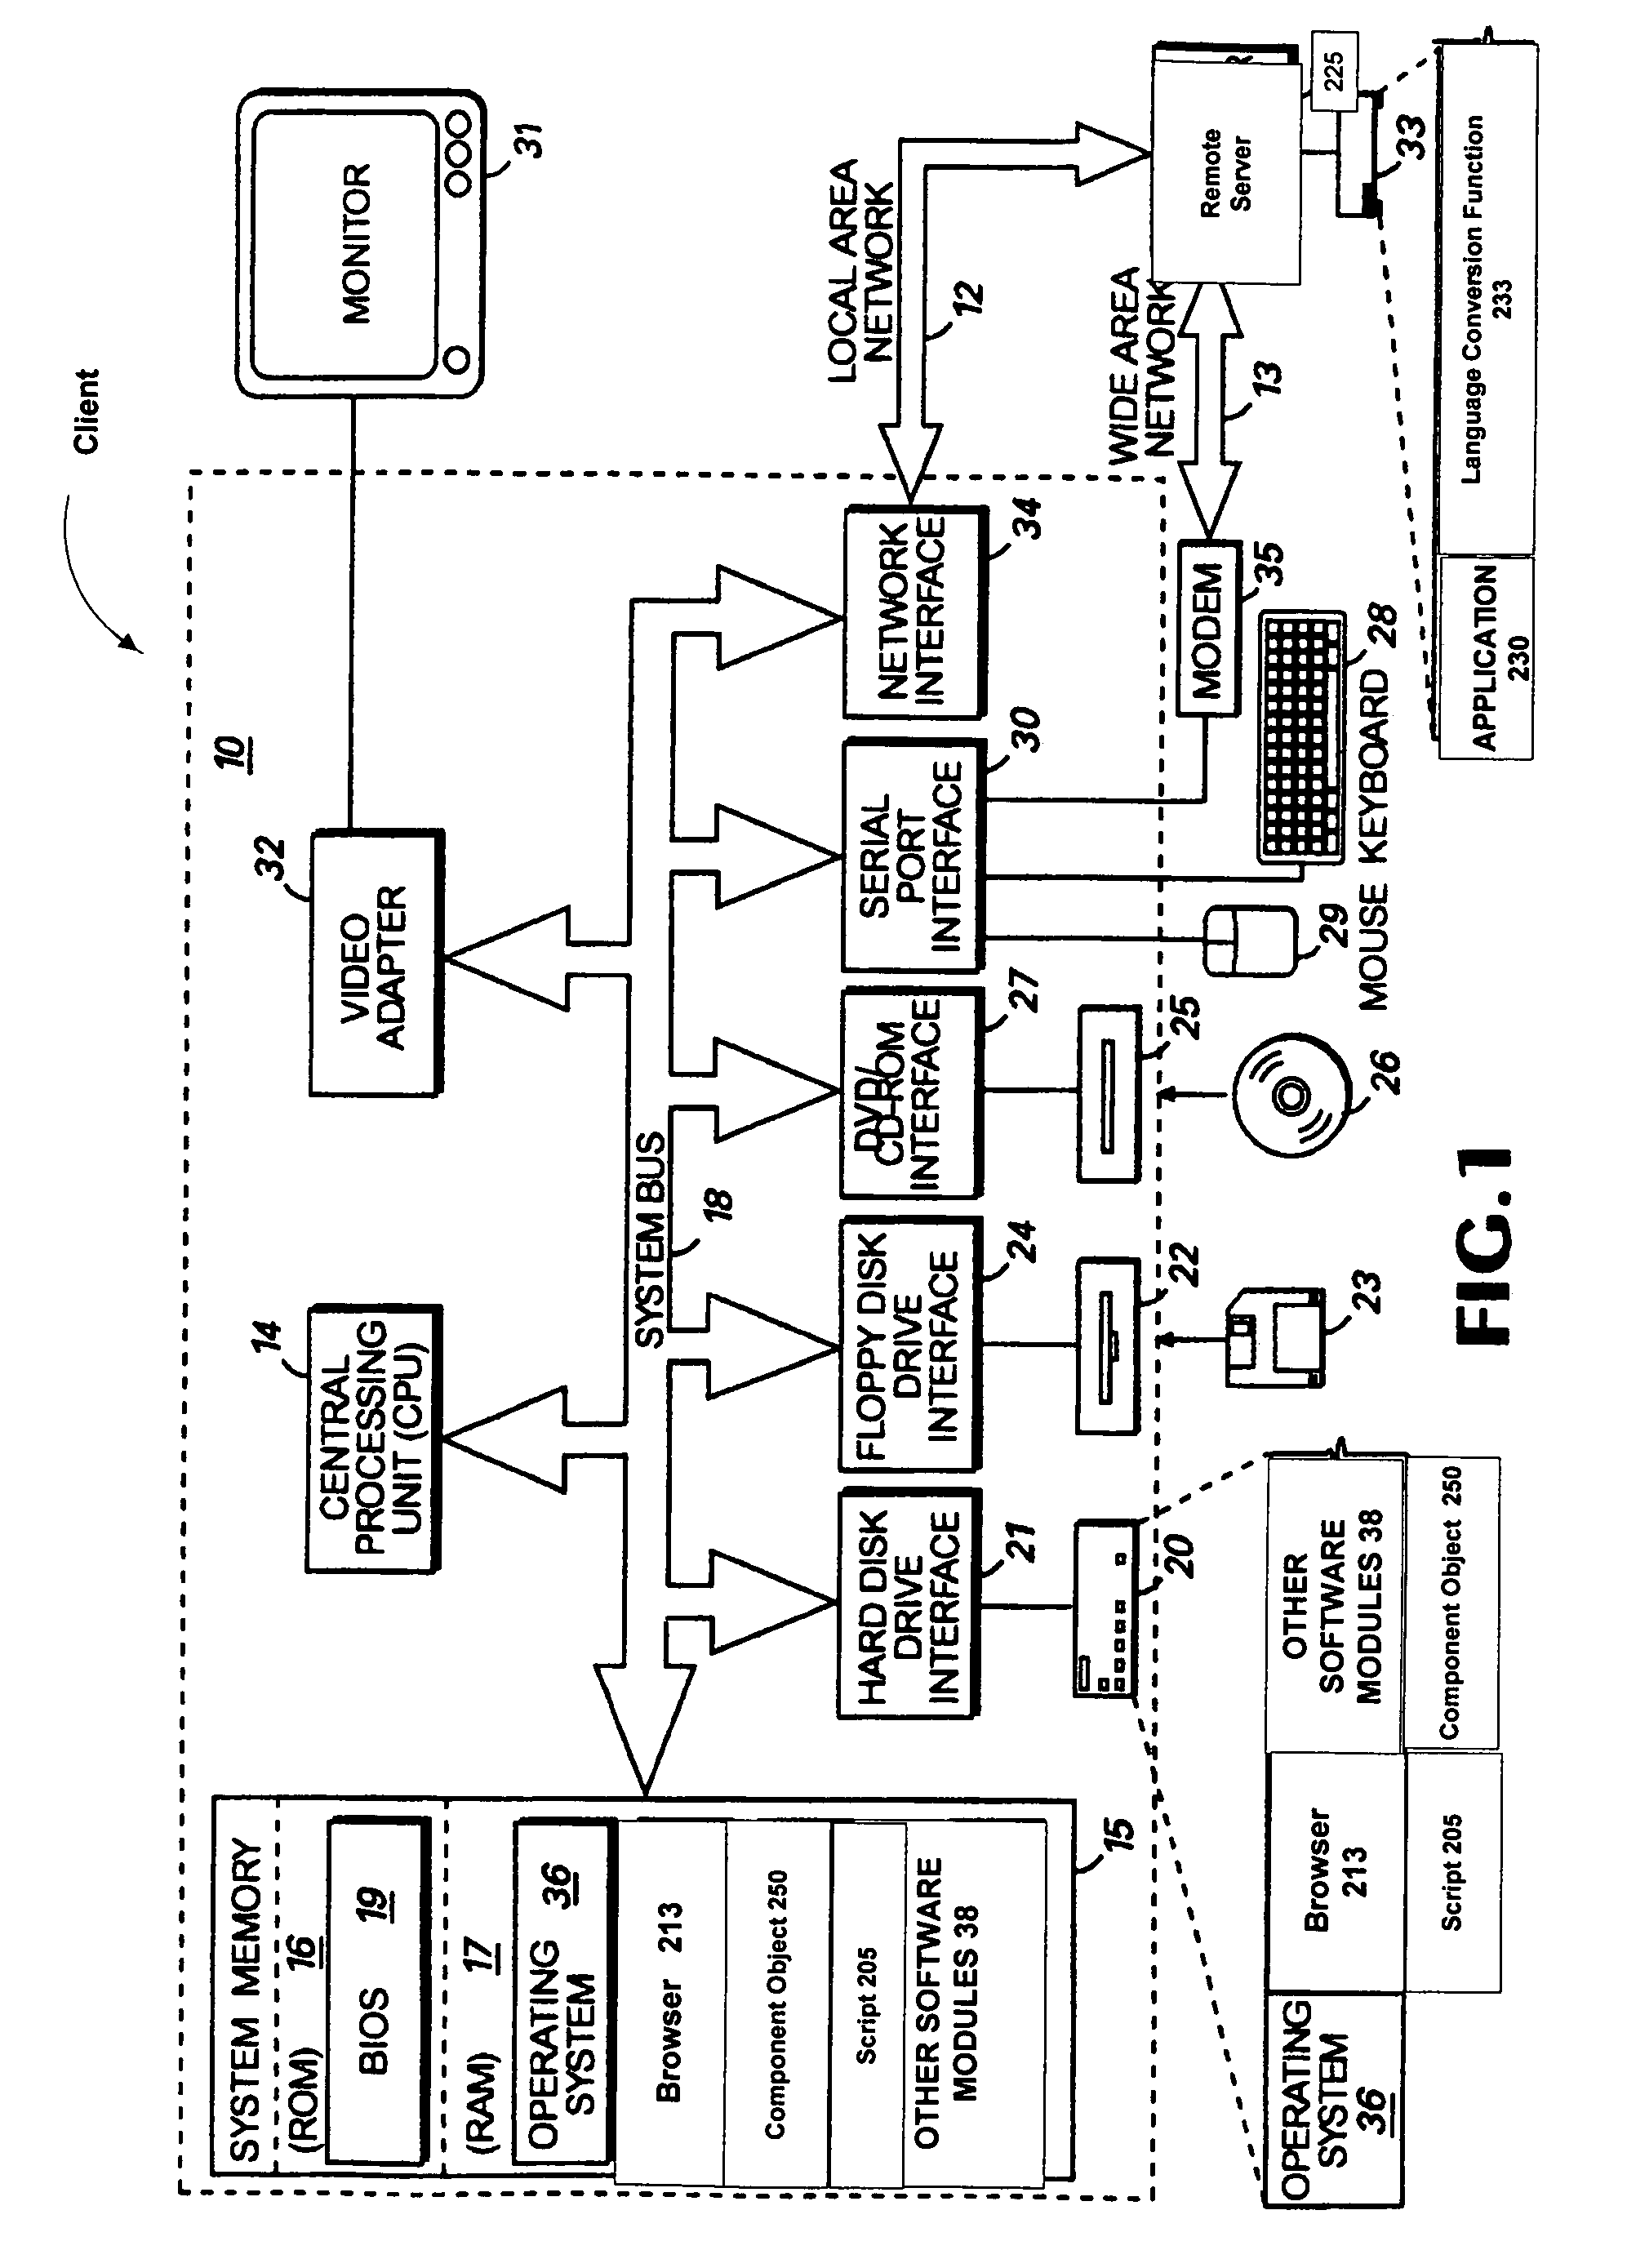 System and method for providing language localization for server-based applications with scripts